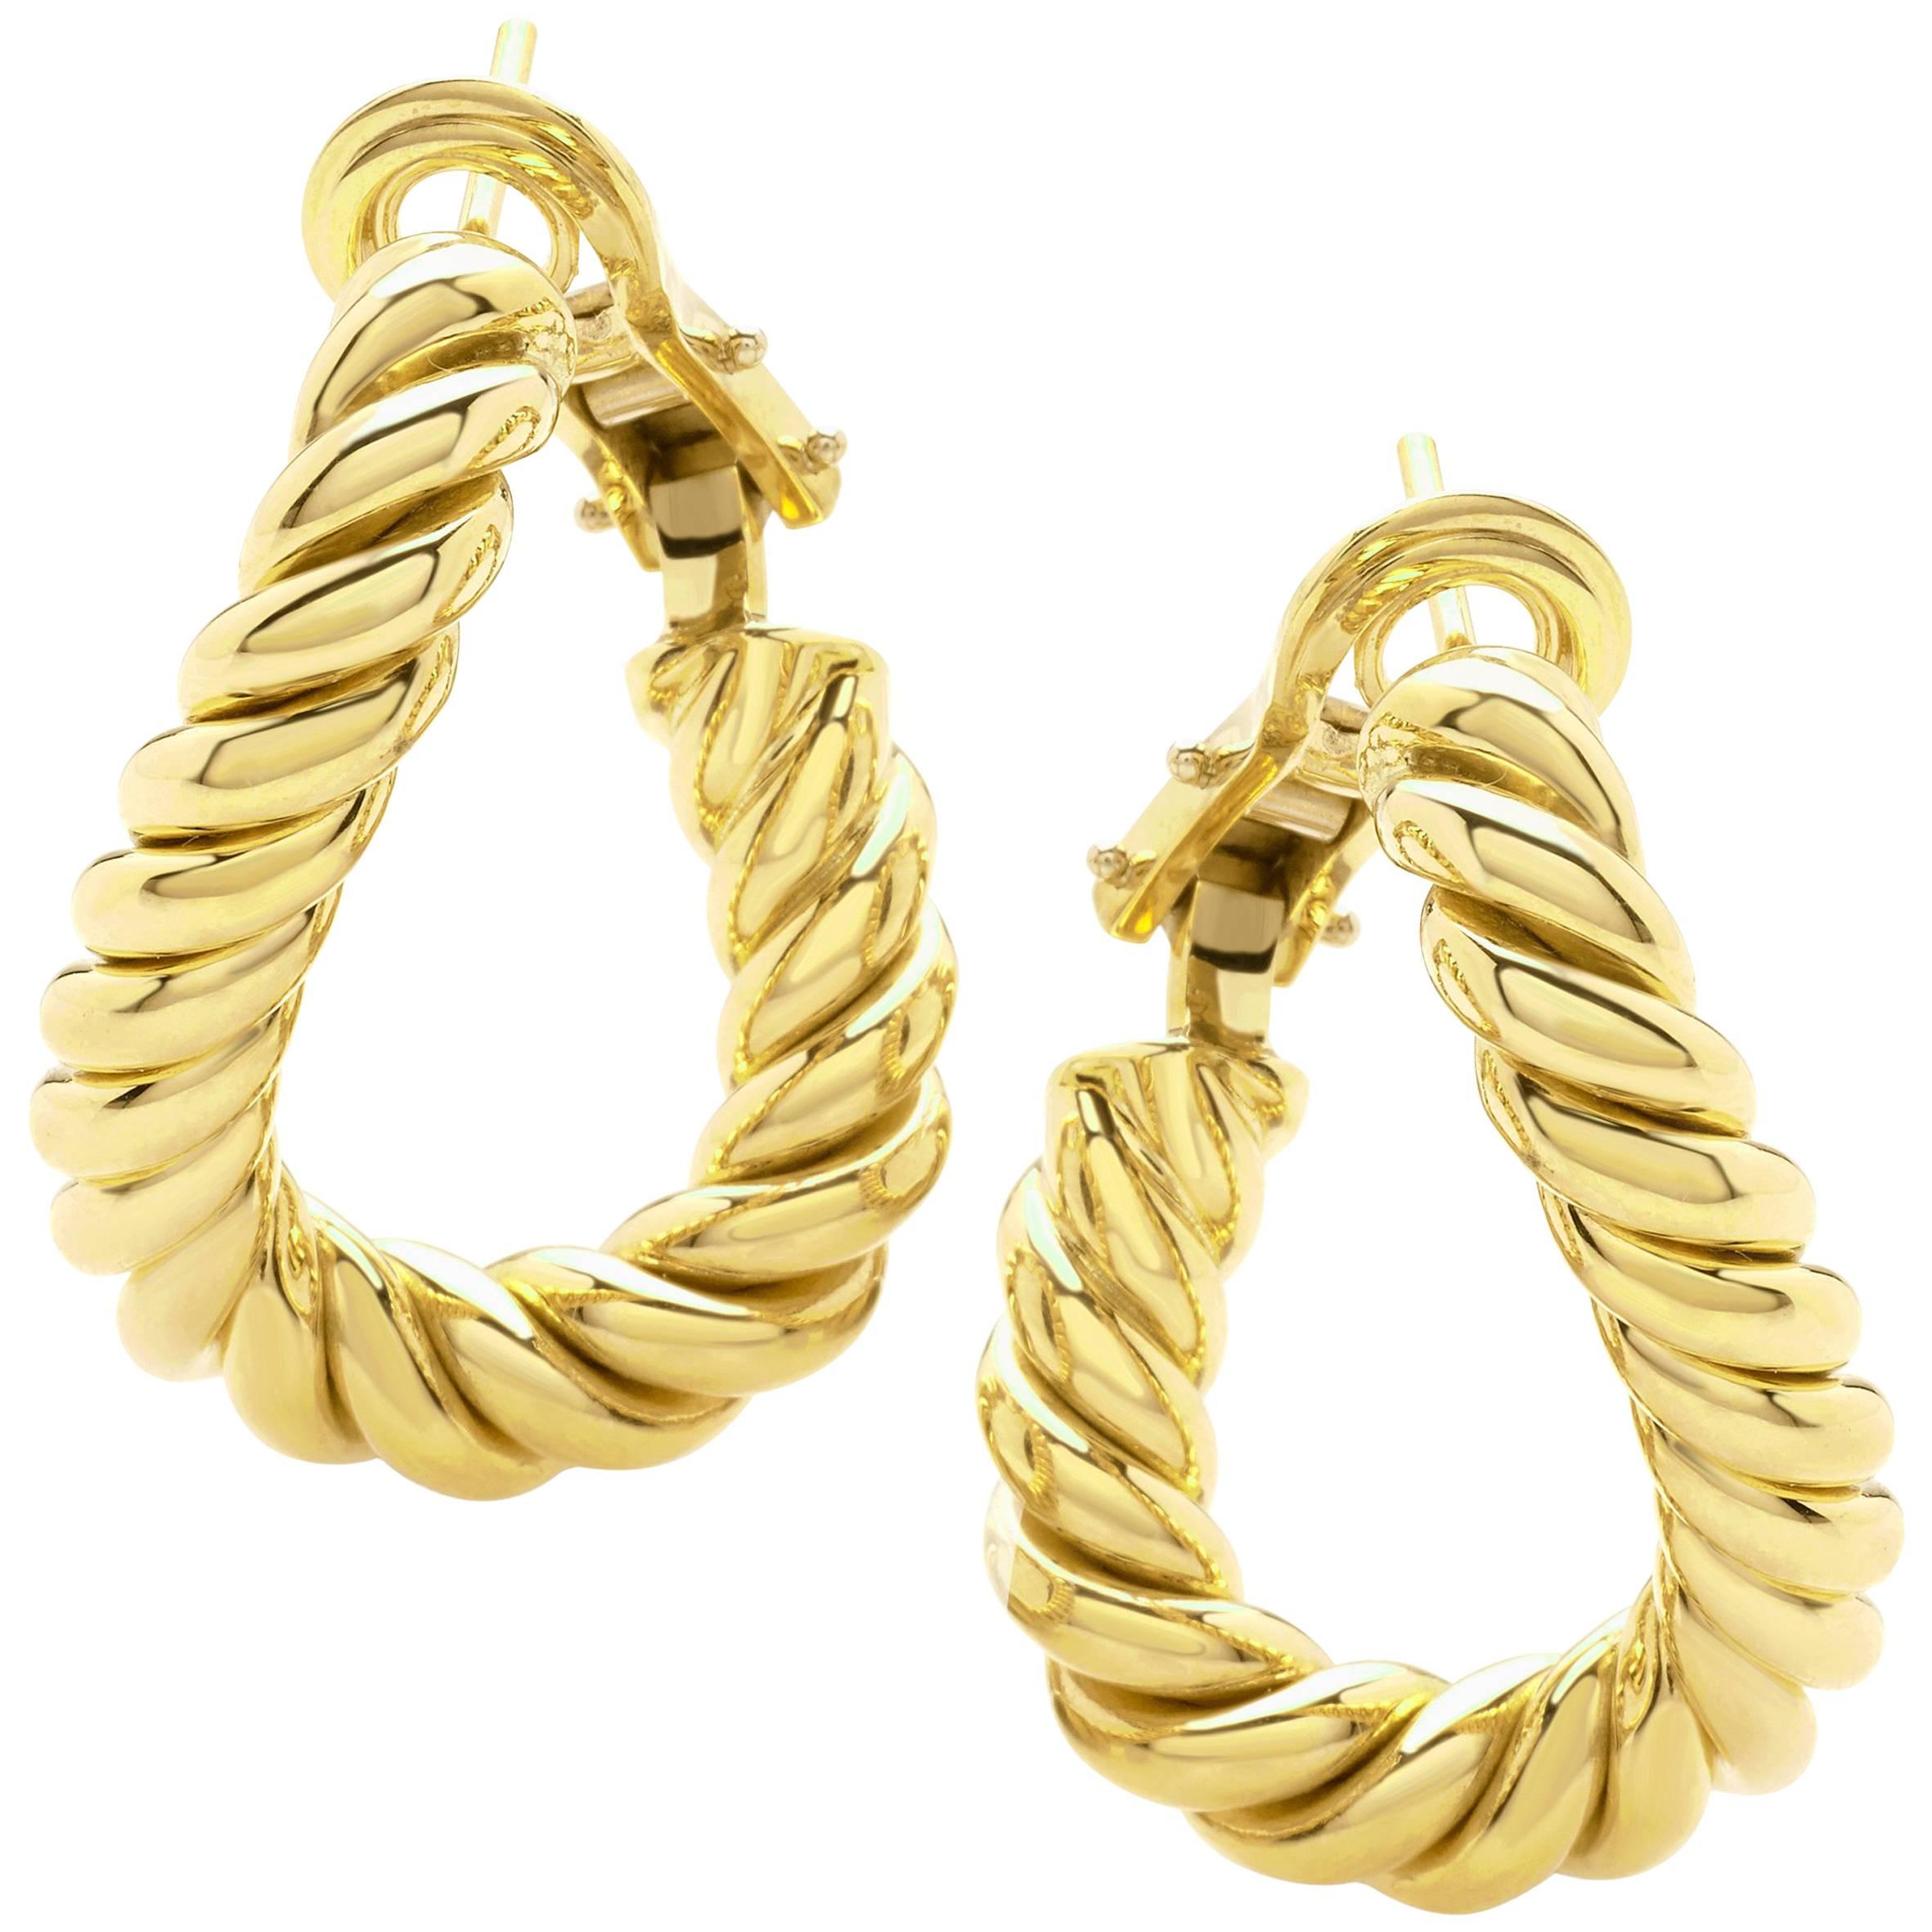 Pair of Earrings from the Collection "Rope" 18 Karat Yellow Gold